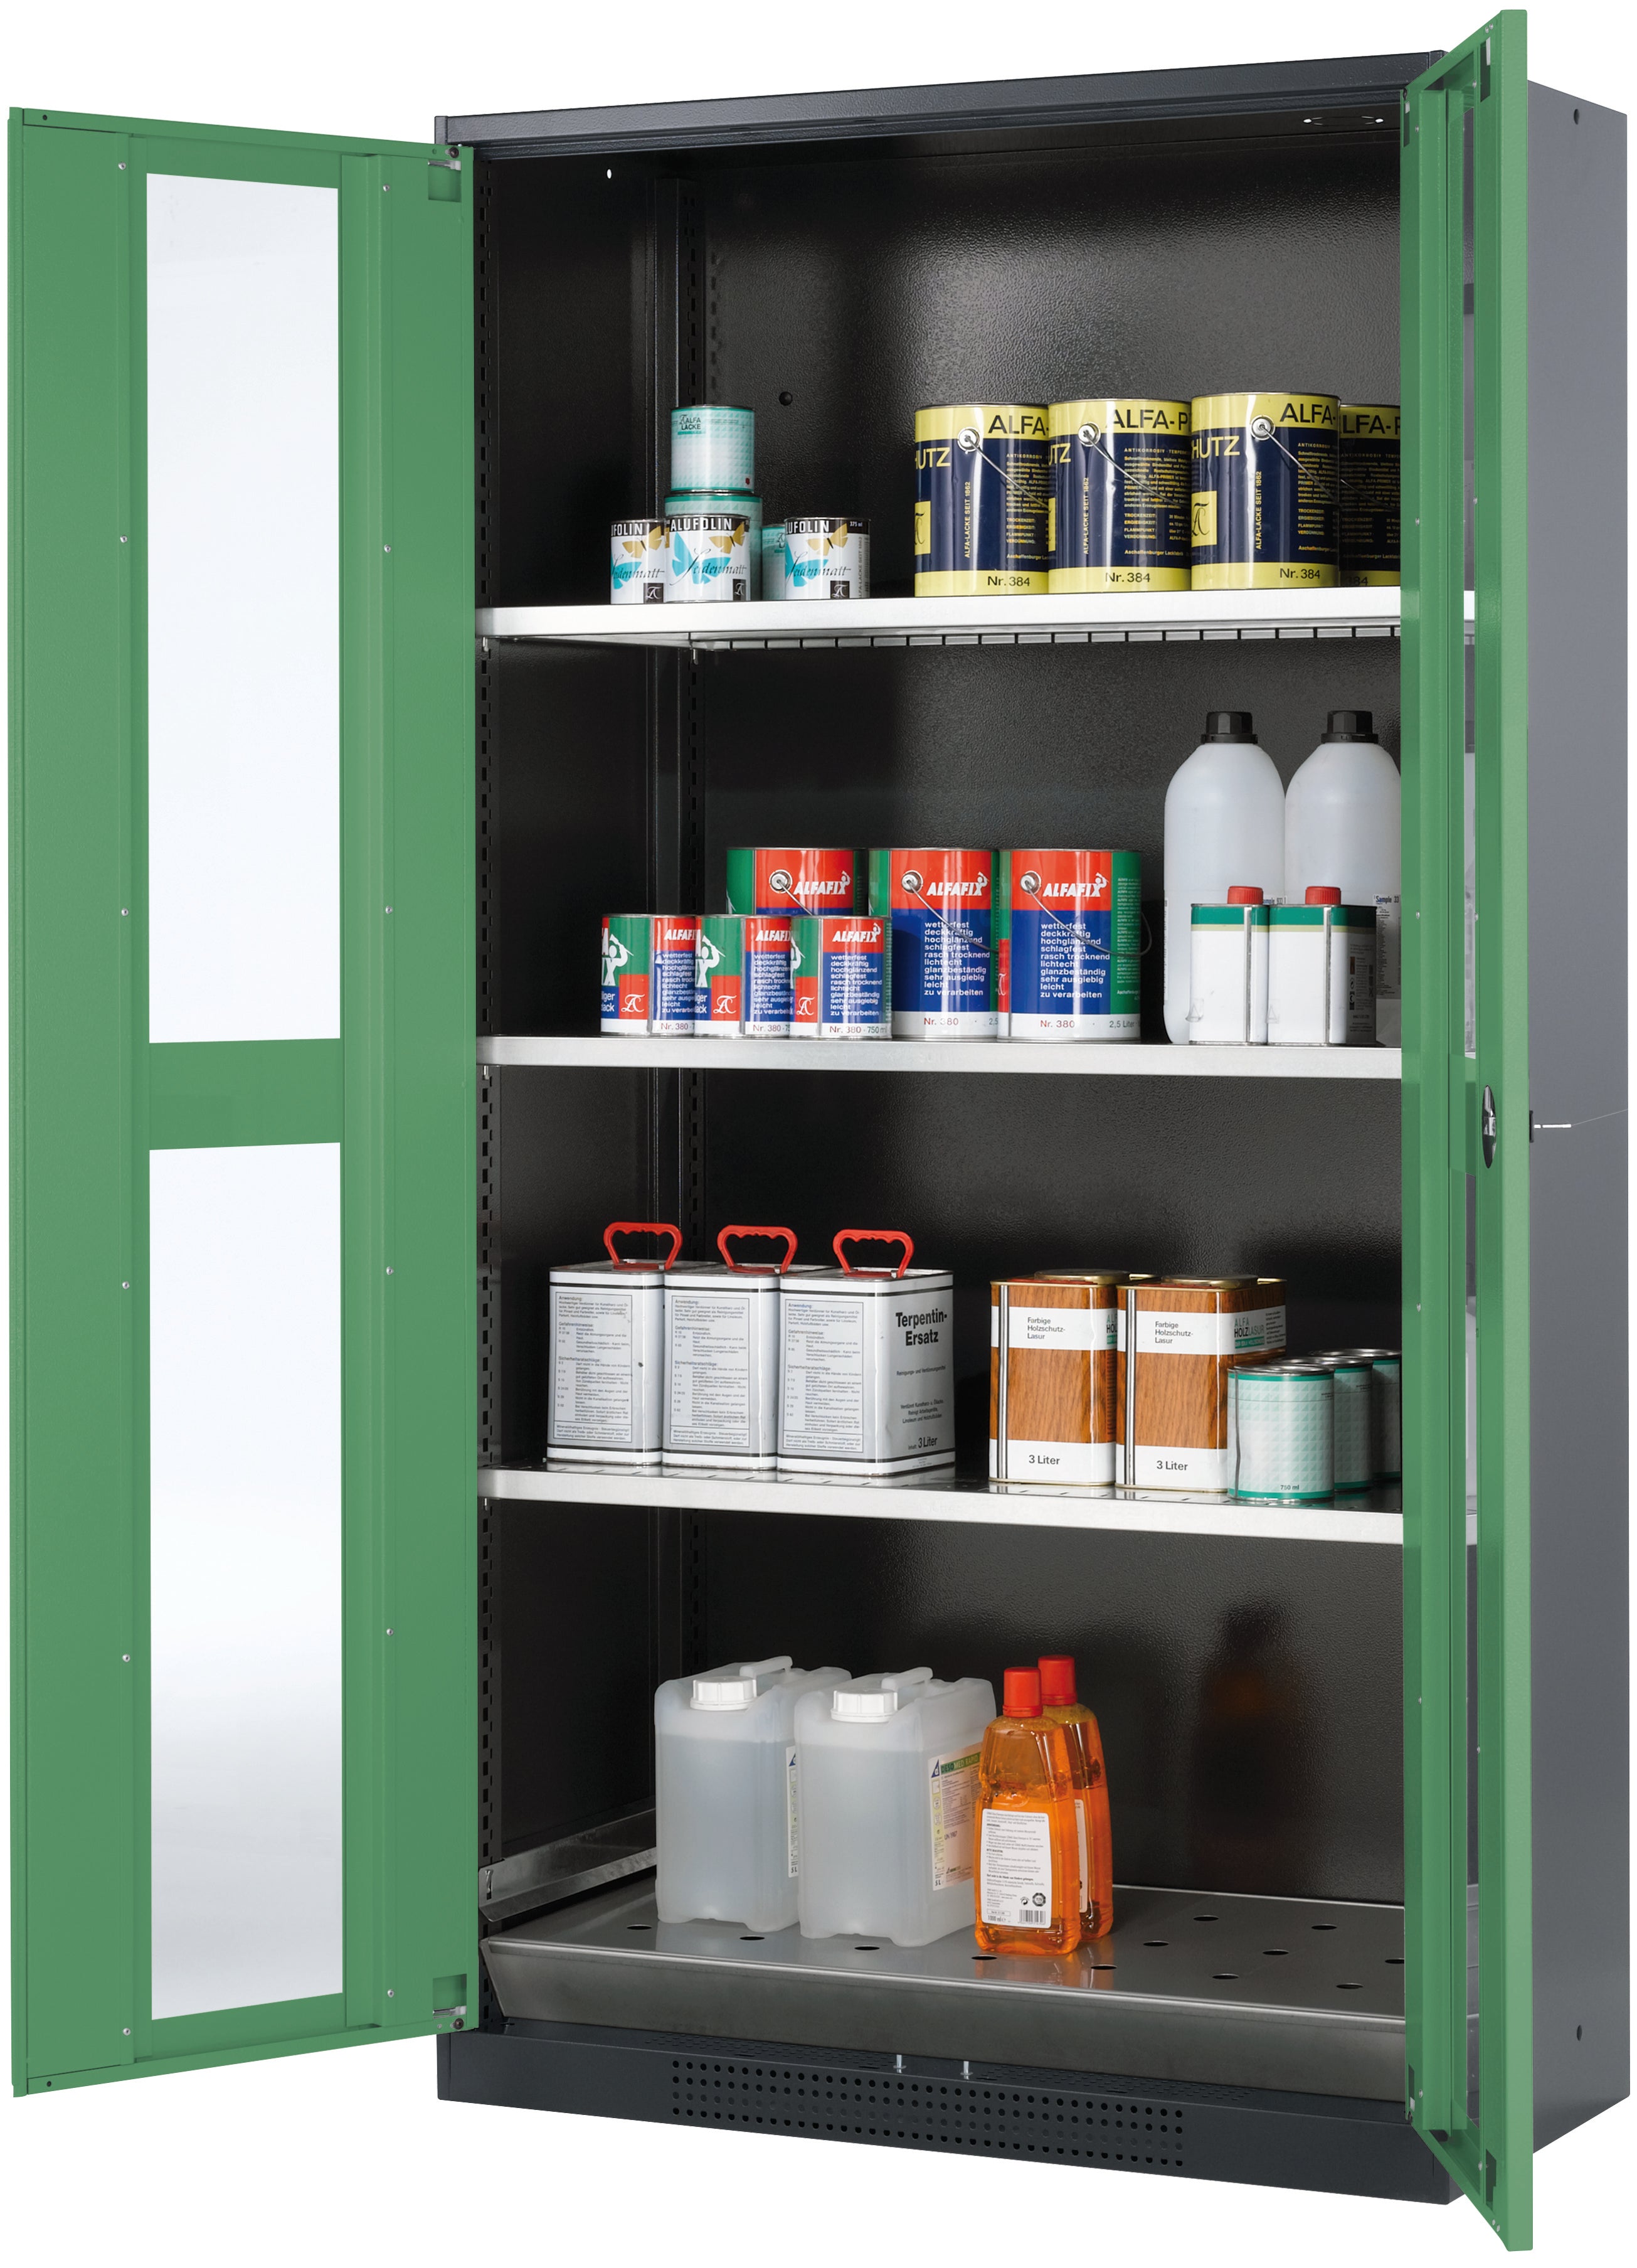 Chemical cabinet CS-CLASSIC-G model CS.195.105.WDFW in reseda green RAL 6011 with 3x standard shelves (sheet steel)